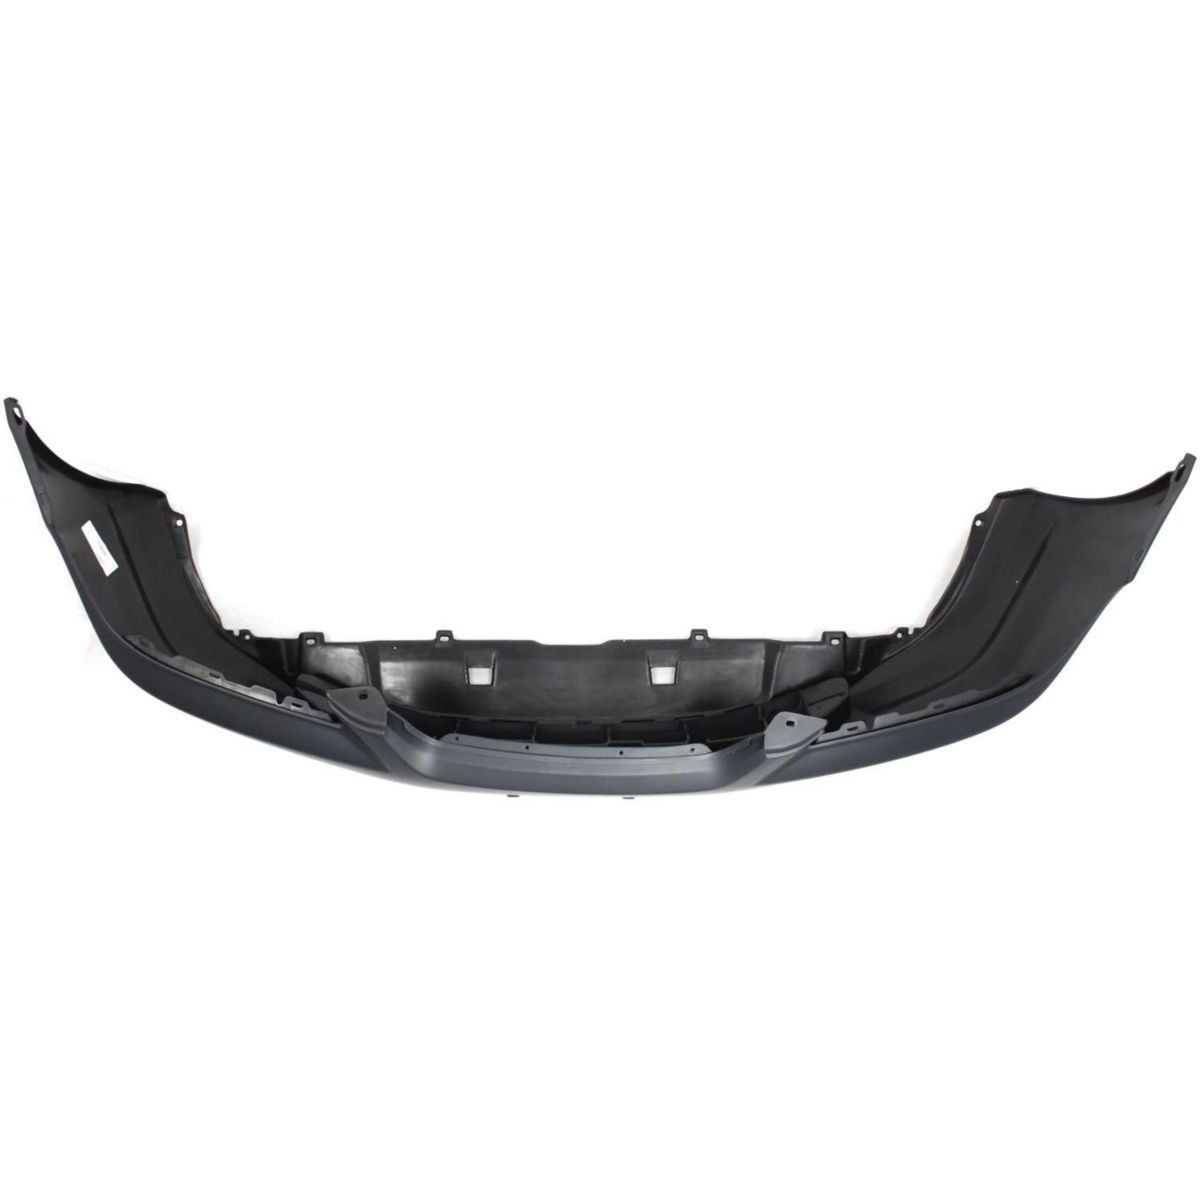 1998-2000 HONDA ACCORD Front Bumper Cover 2dr coupe Painted to Match